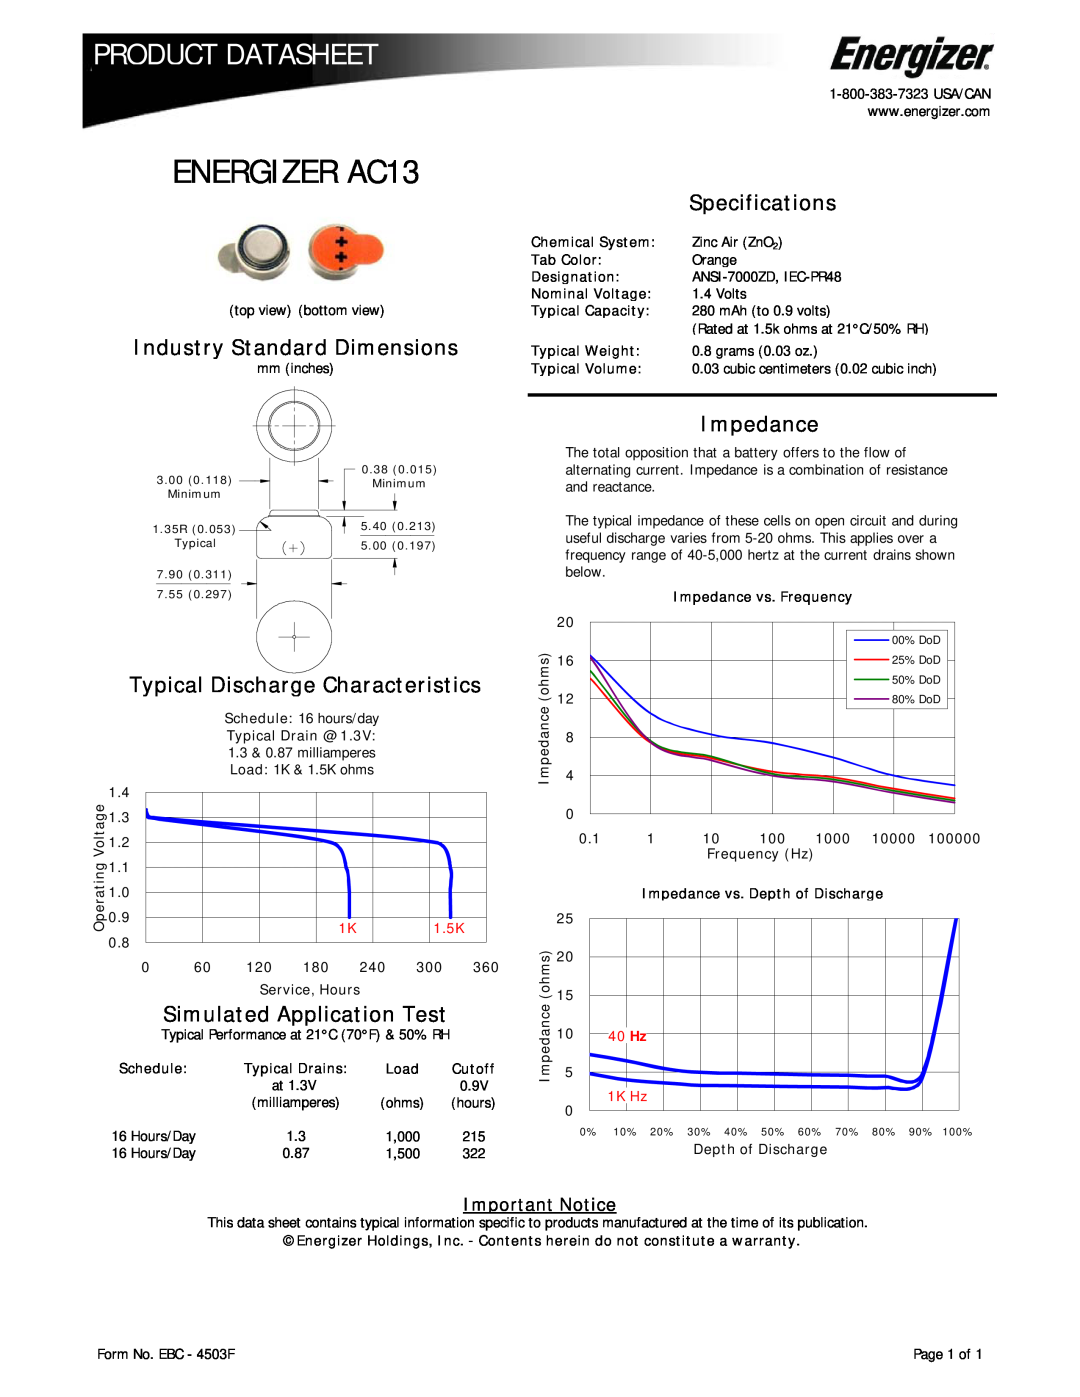 Energizer dimensions ENERGIZER AC13, Product Datasheet, Specifications, Industry Standard Dimensions, Impedance, 1.5K 